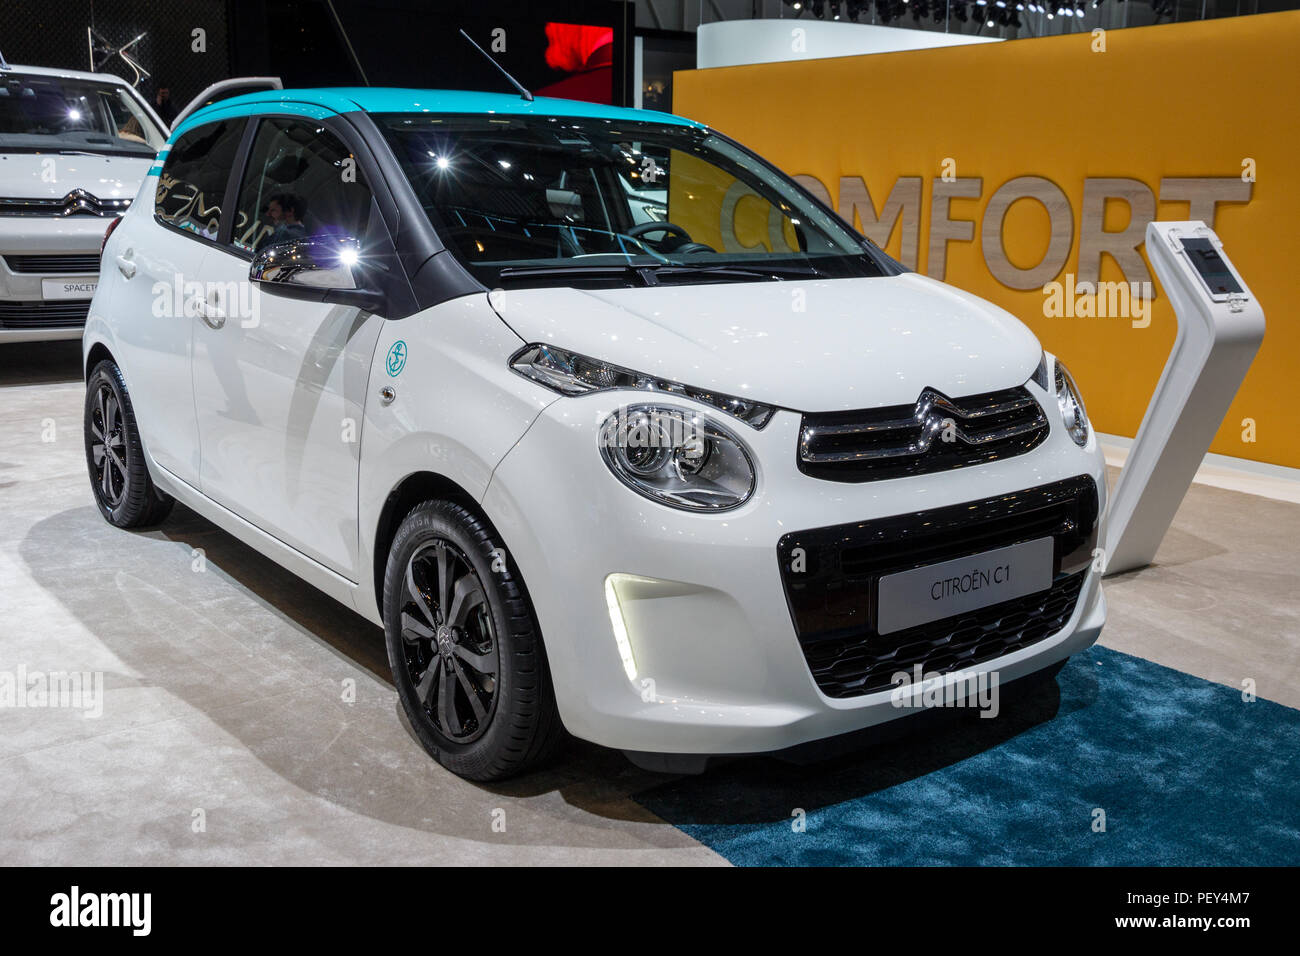 Citroen Auto Show High Resolution Stock Photography And Images - Alamy